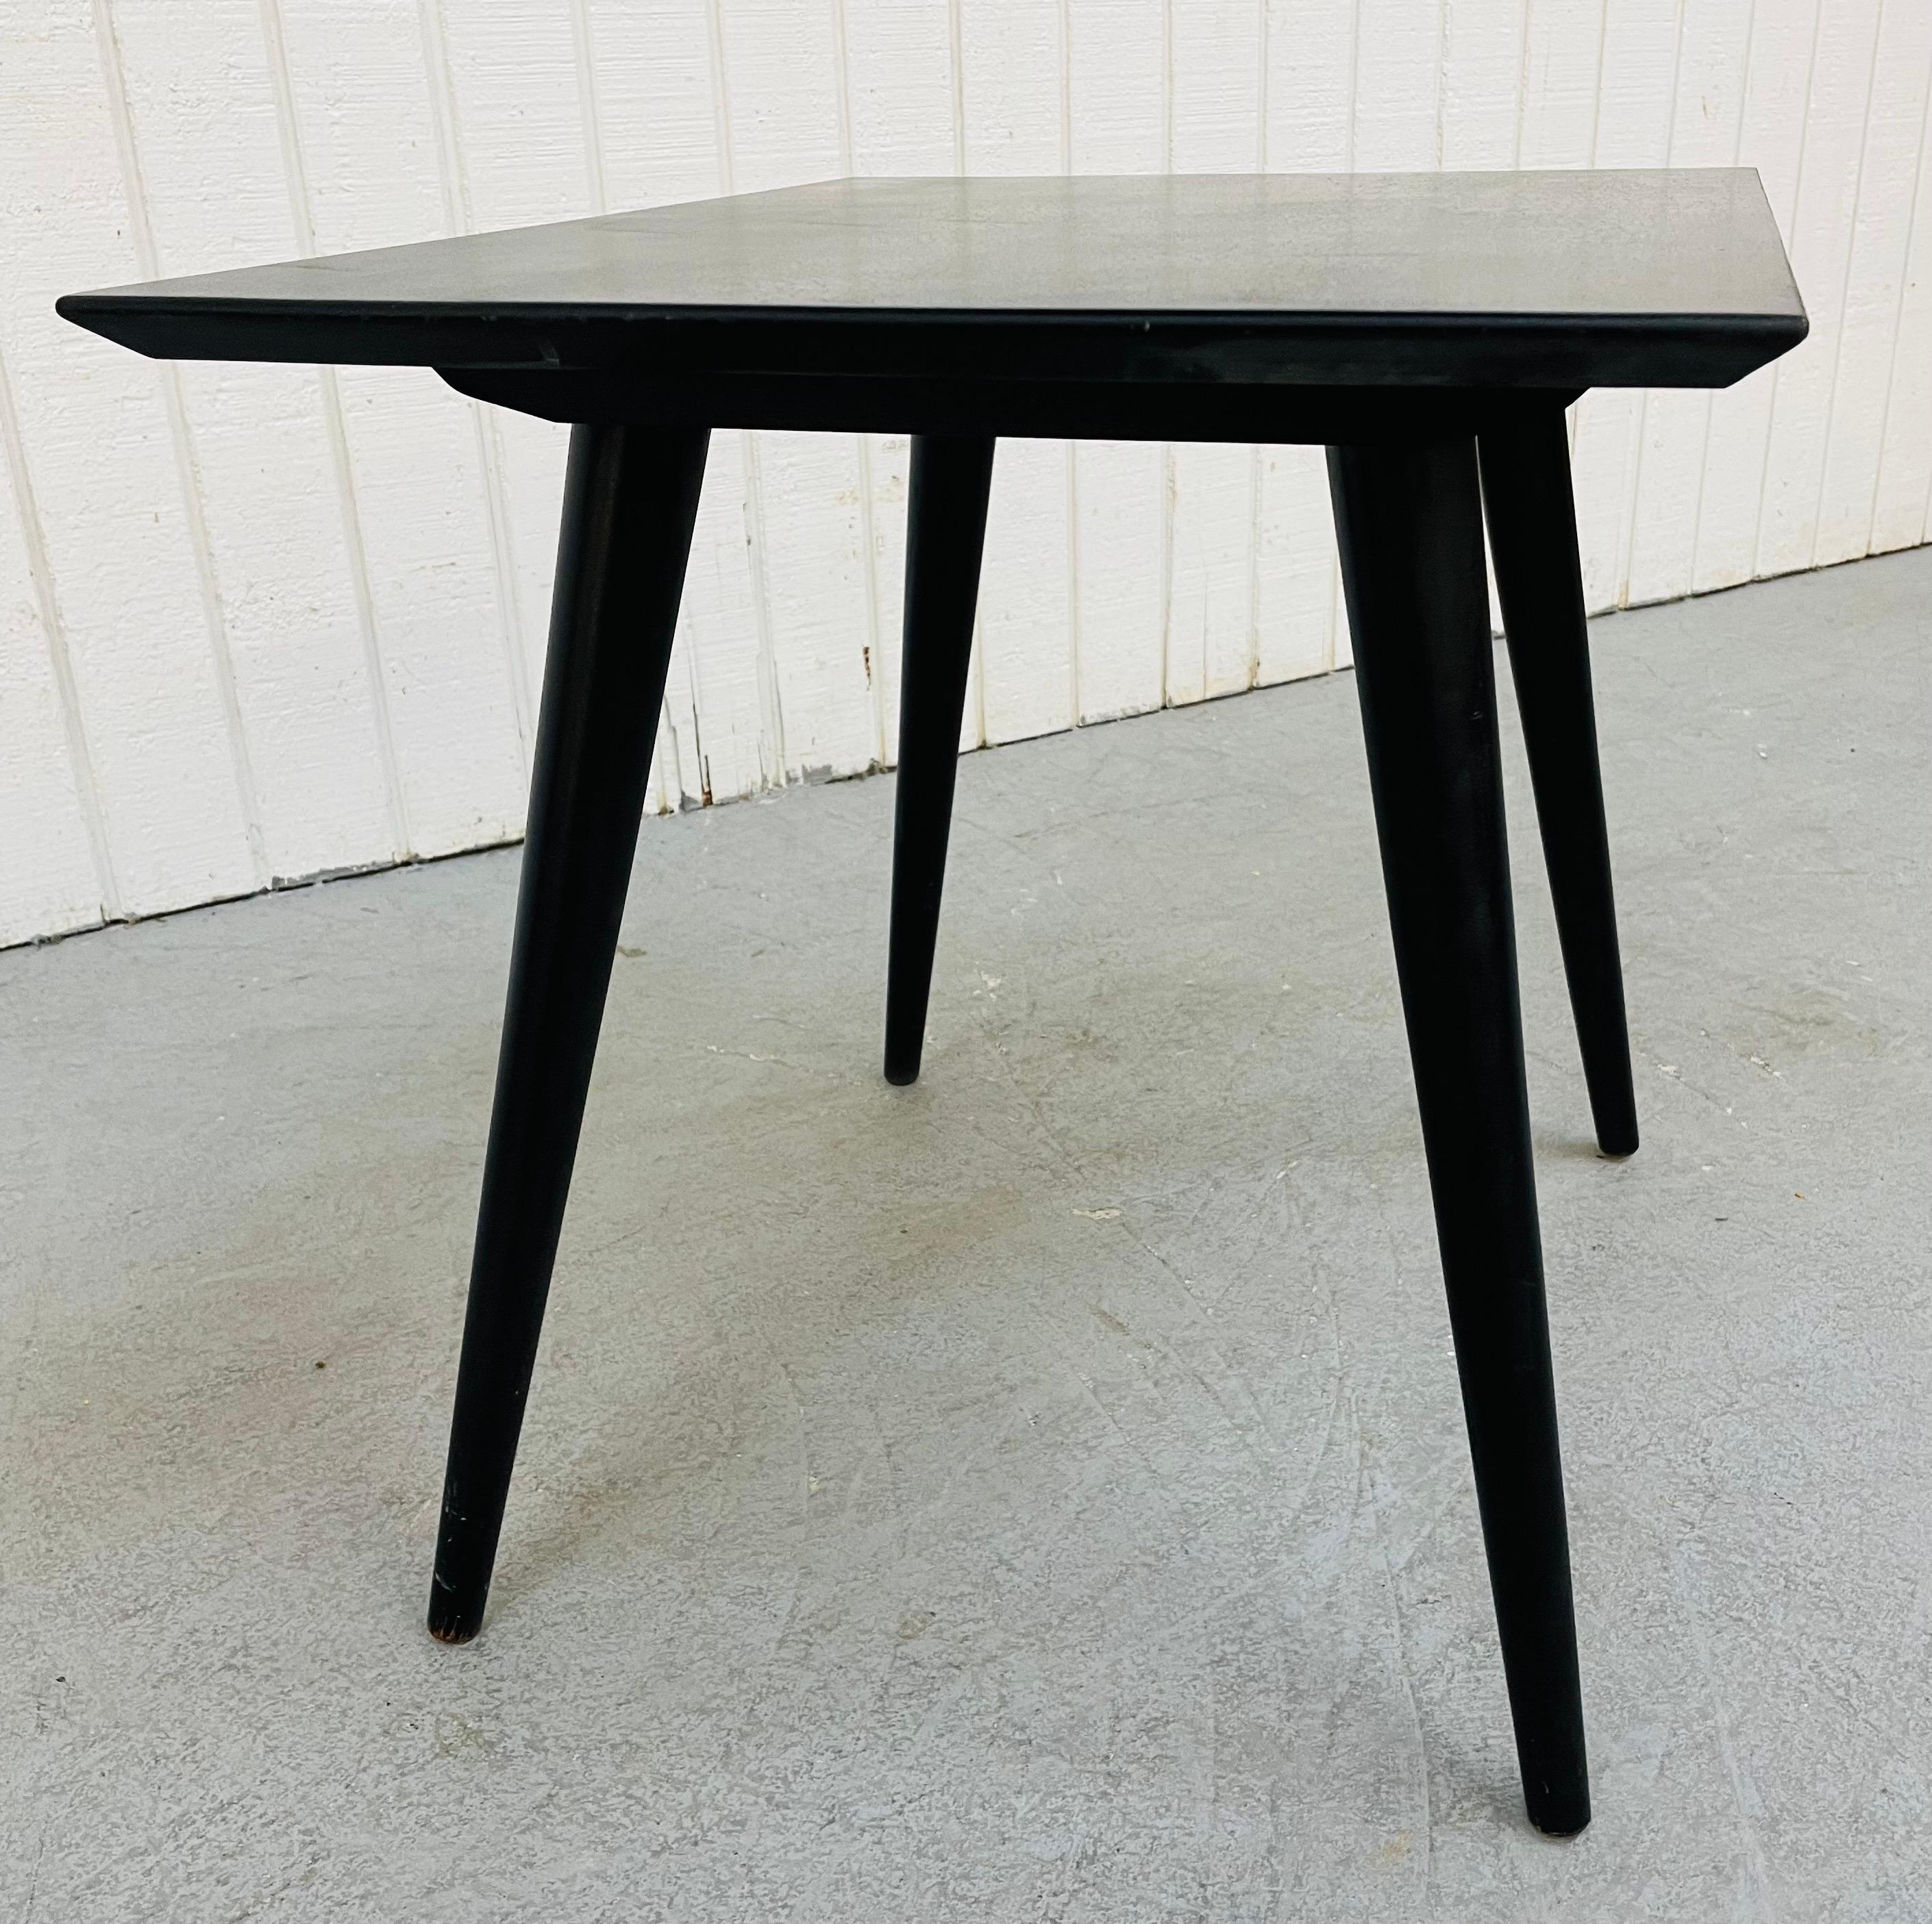 This listing is for a Mid-Century Modern Paul McCobb Planner group side table. Featuring a rectangular top, four long modern legs, and a fresh black painted finish.